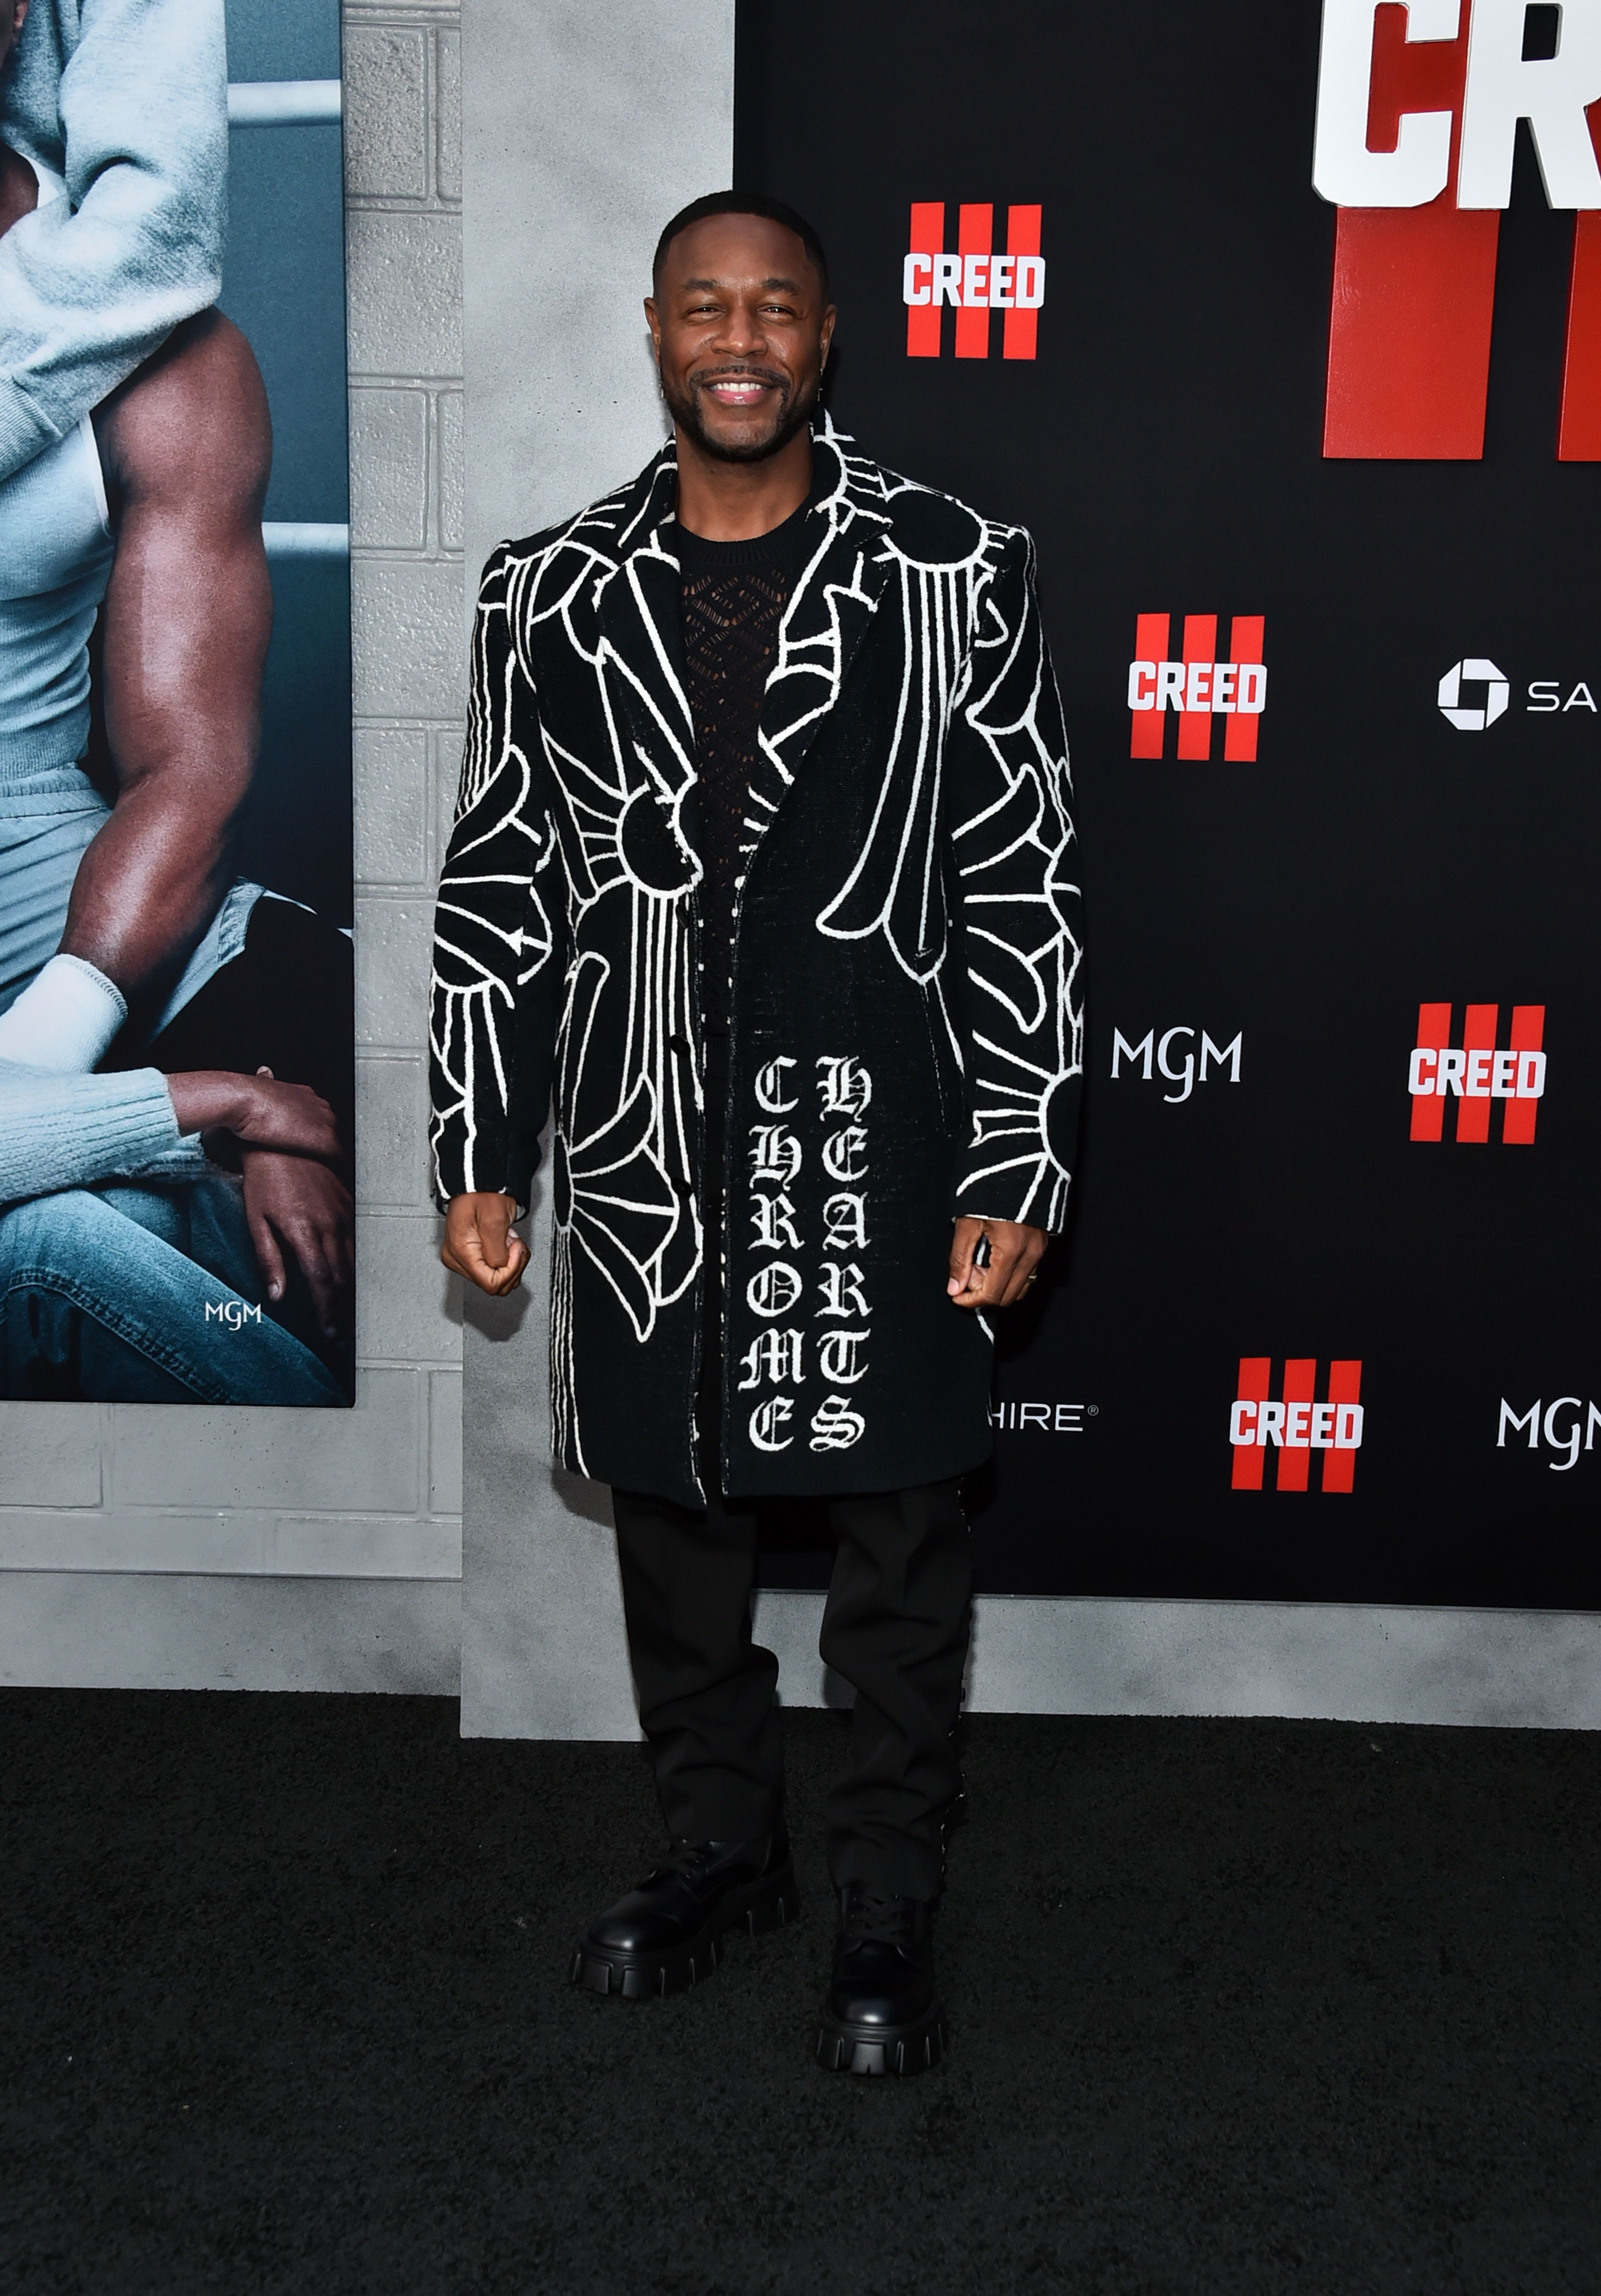 Los Angeles Premiere Of "CREED III" - Arrivals